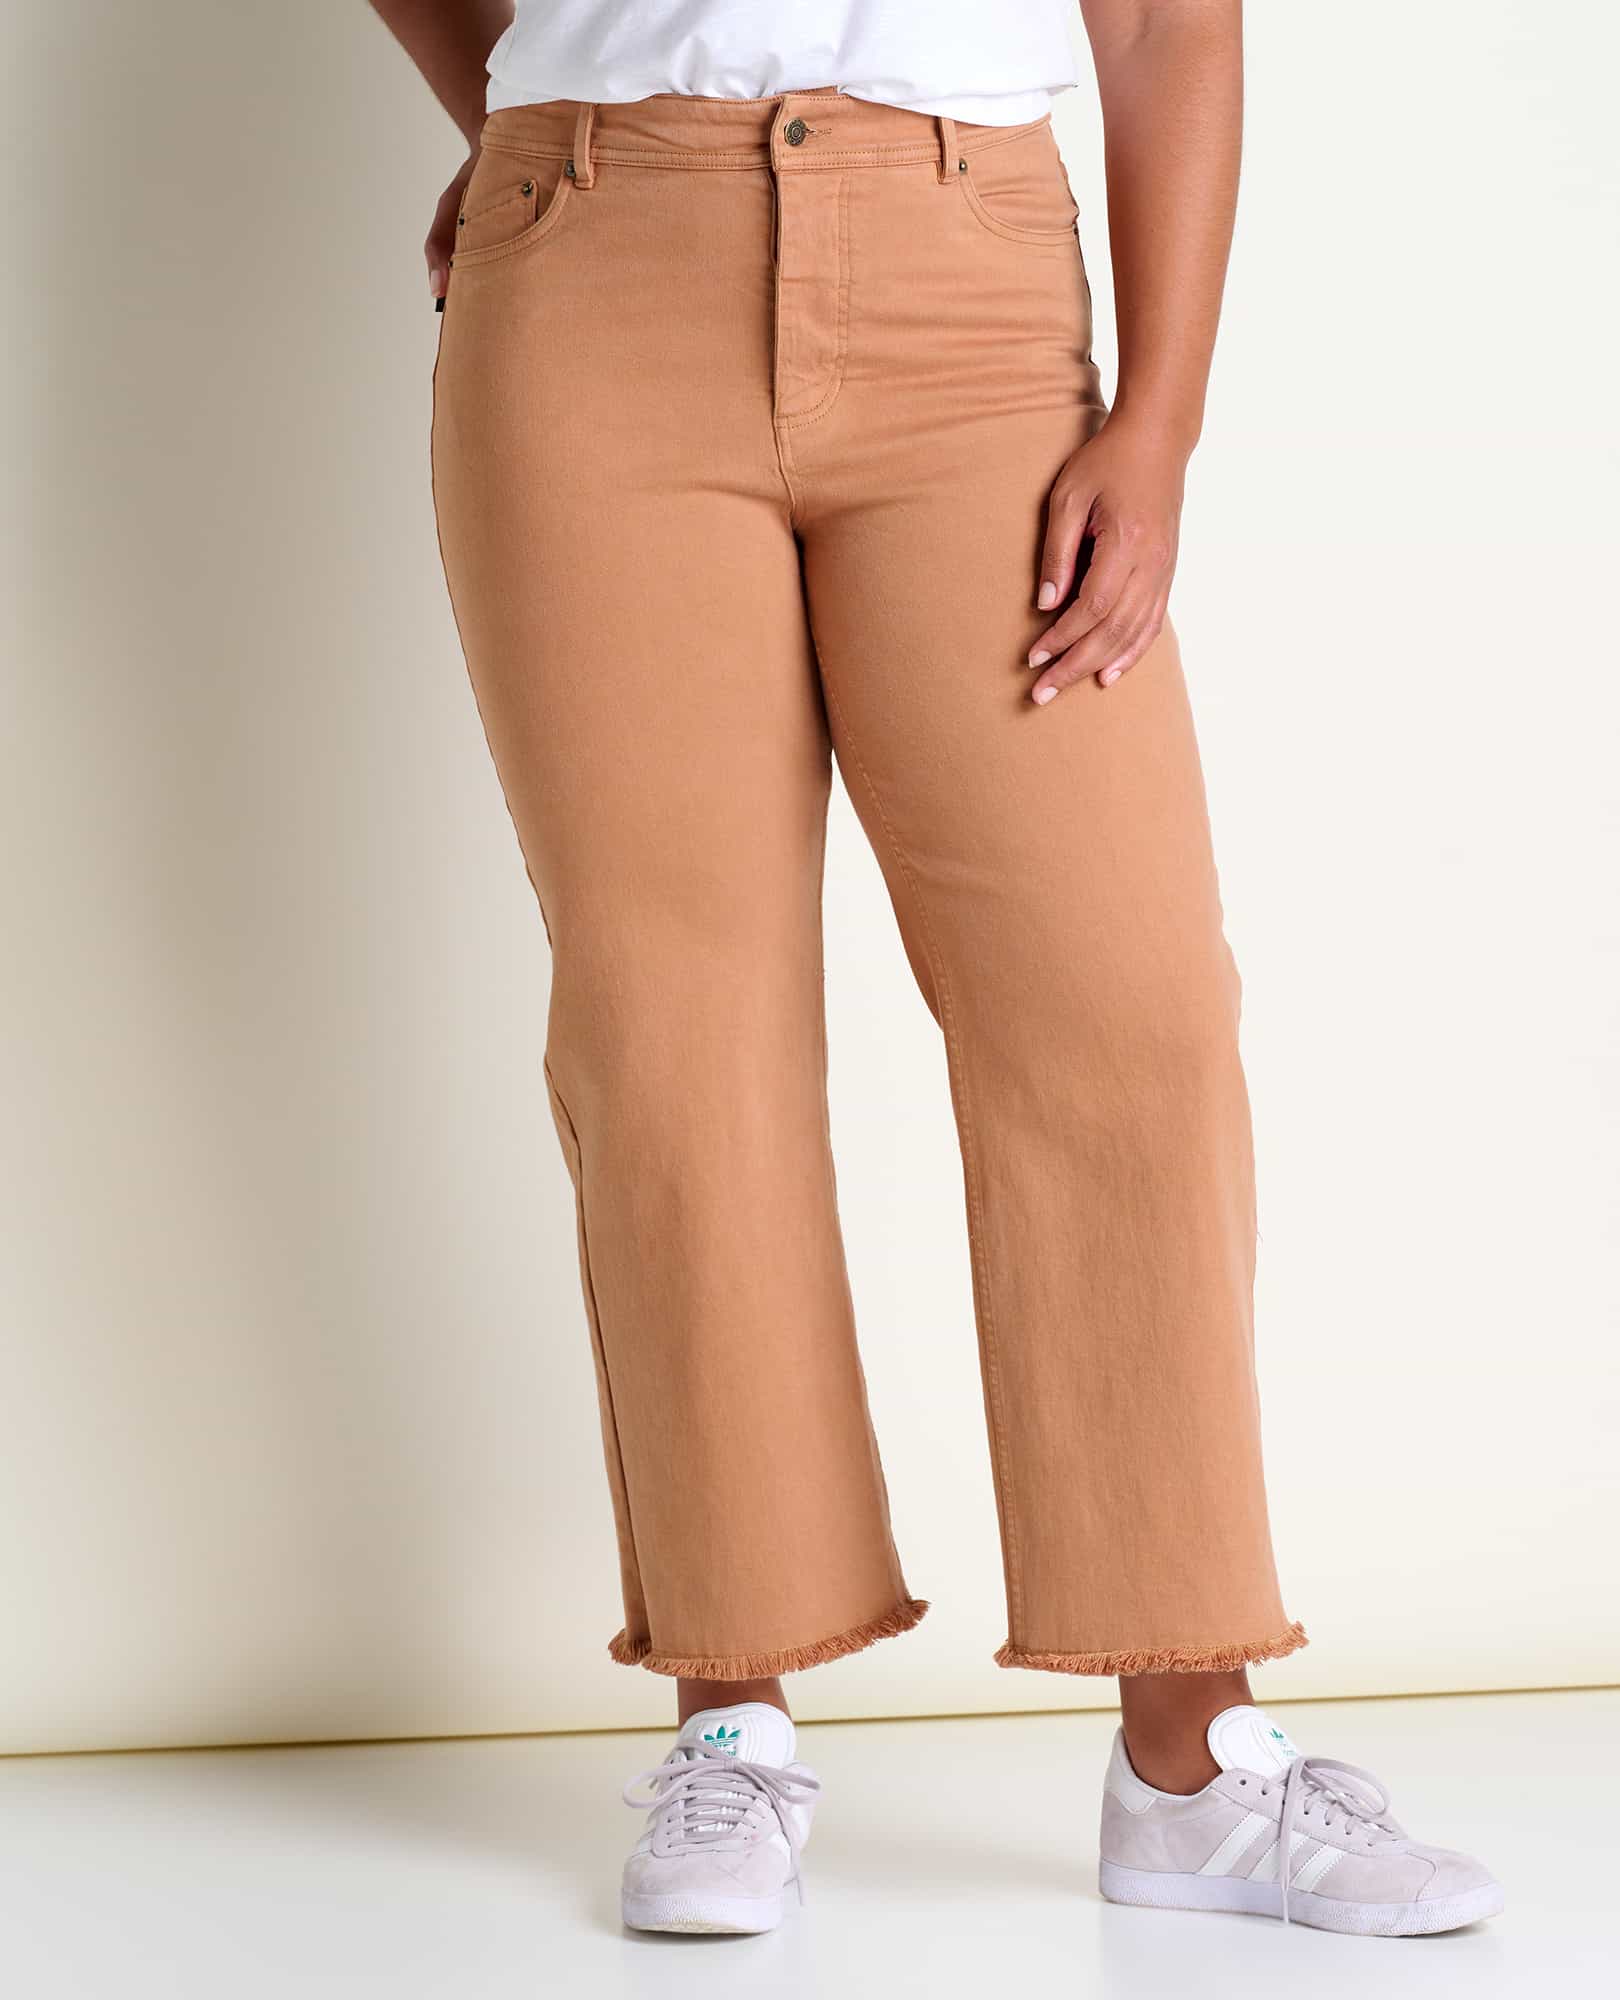 Groove Pant Straight - Resale